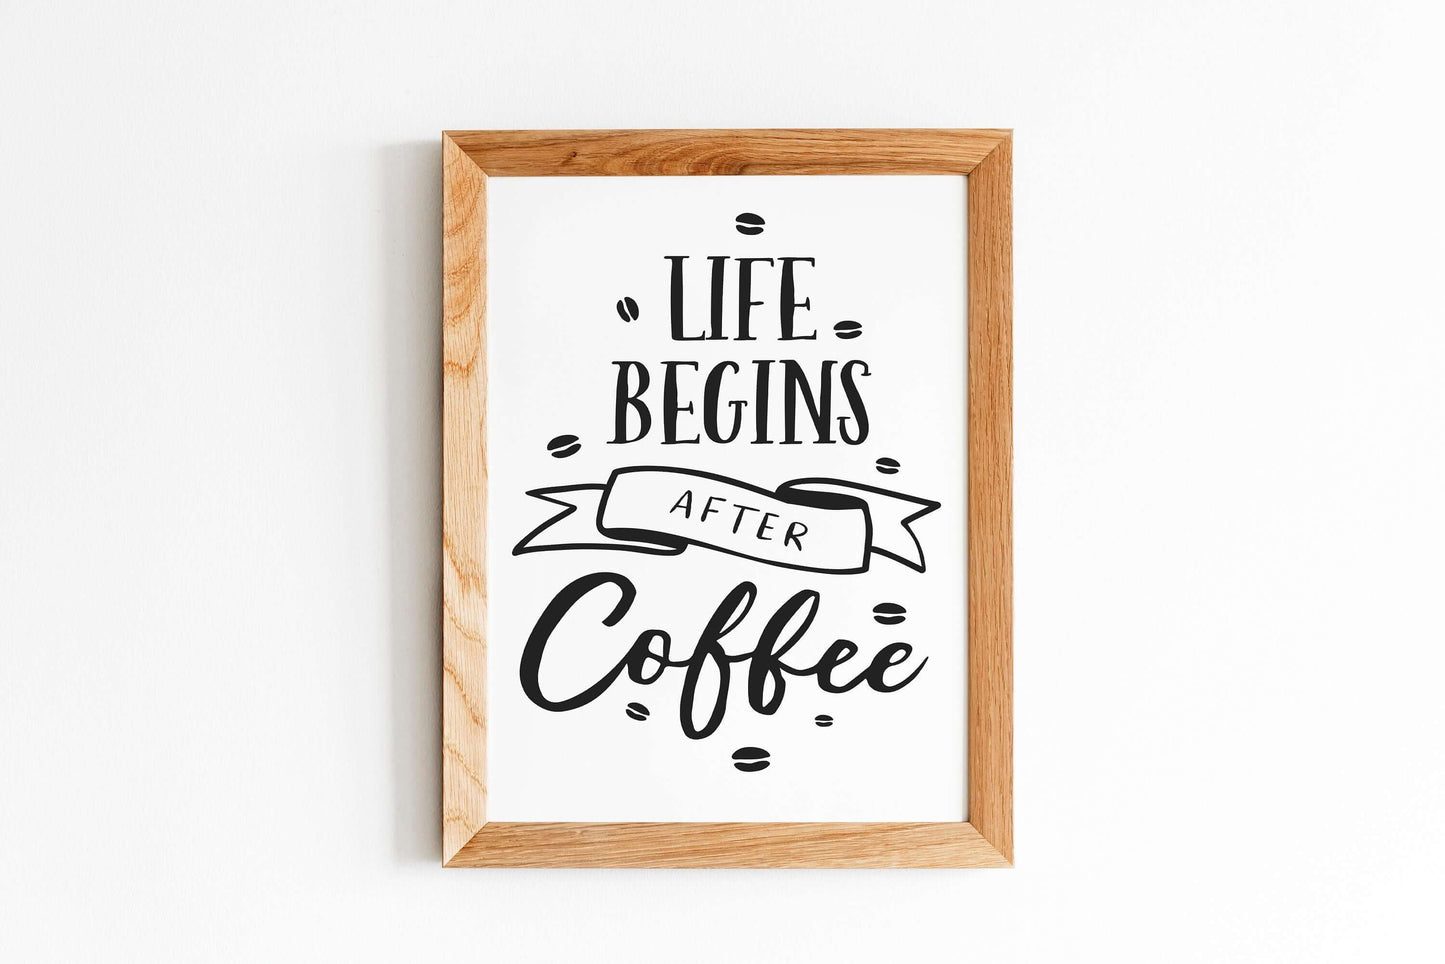 Life Begins After Coffee Print, Home Print, Home Decor, Wall Art, Kitchen Print, Kitchen Decor, Coffee Print, Fun Print, Coffee Quote